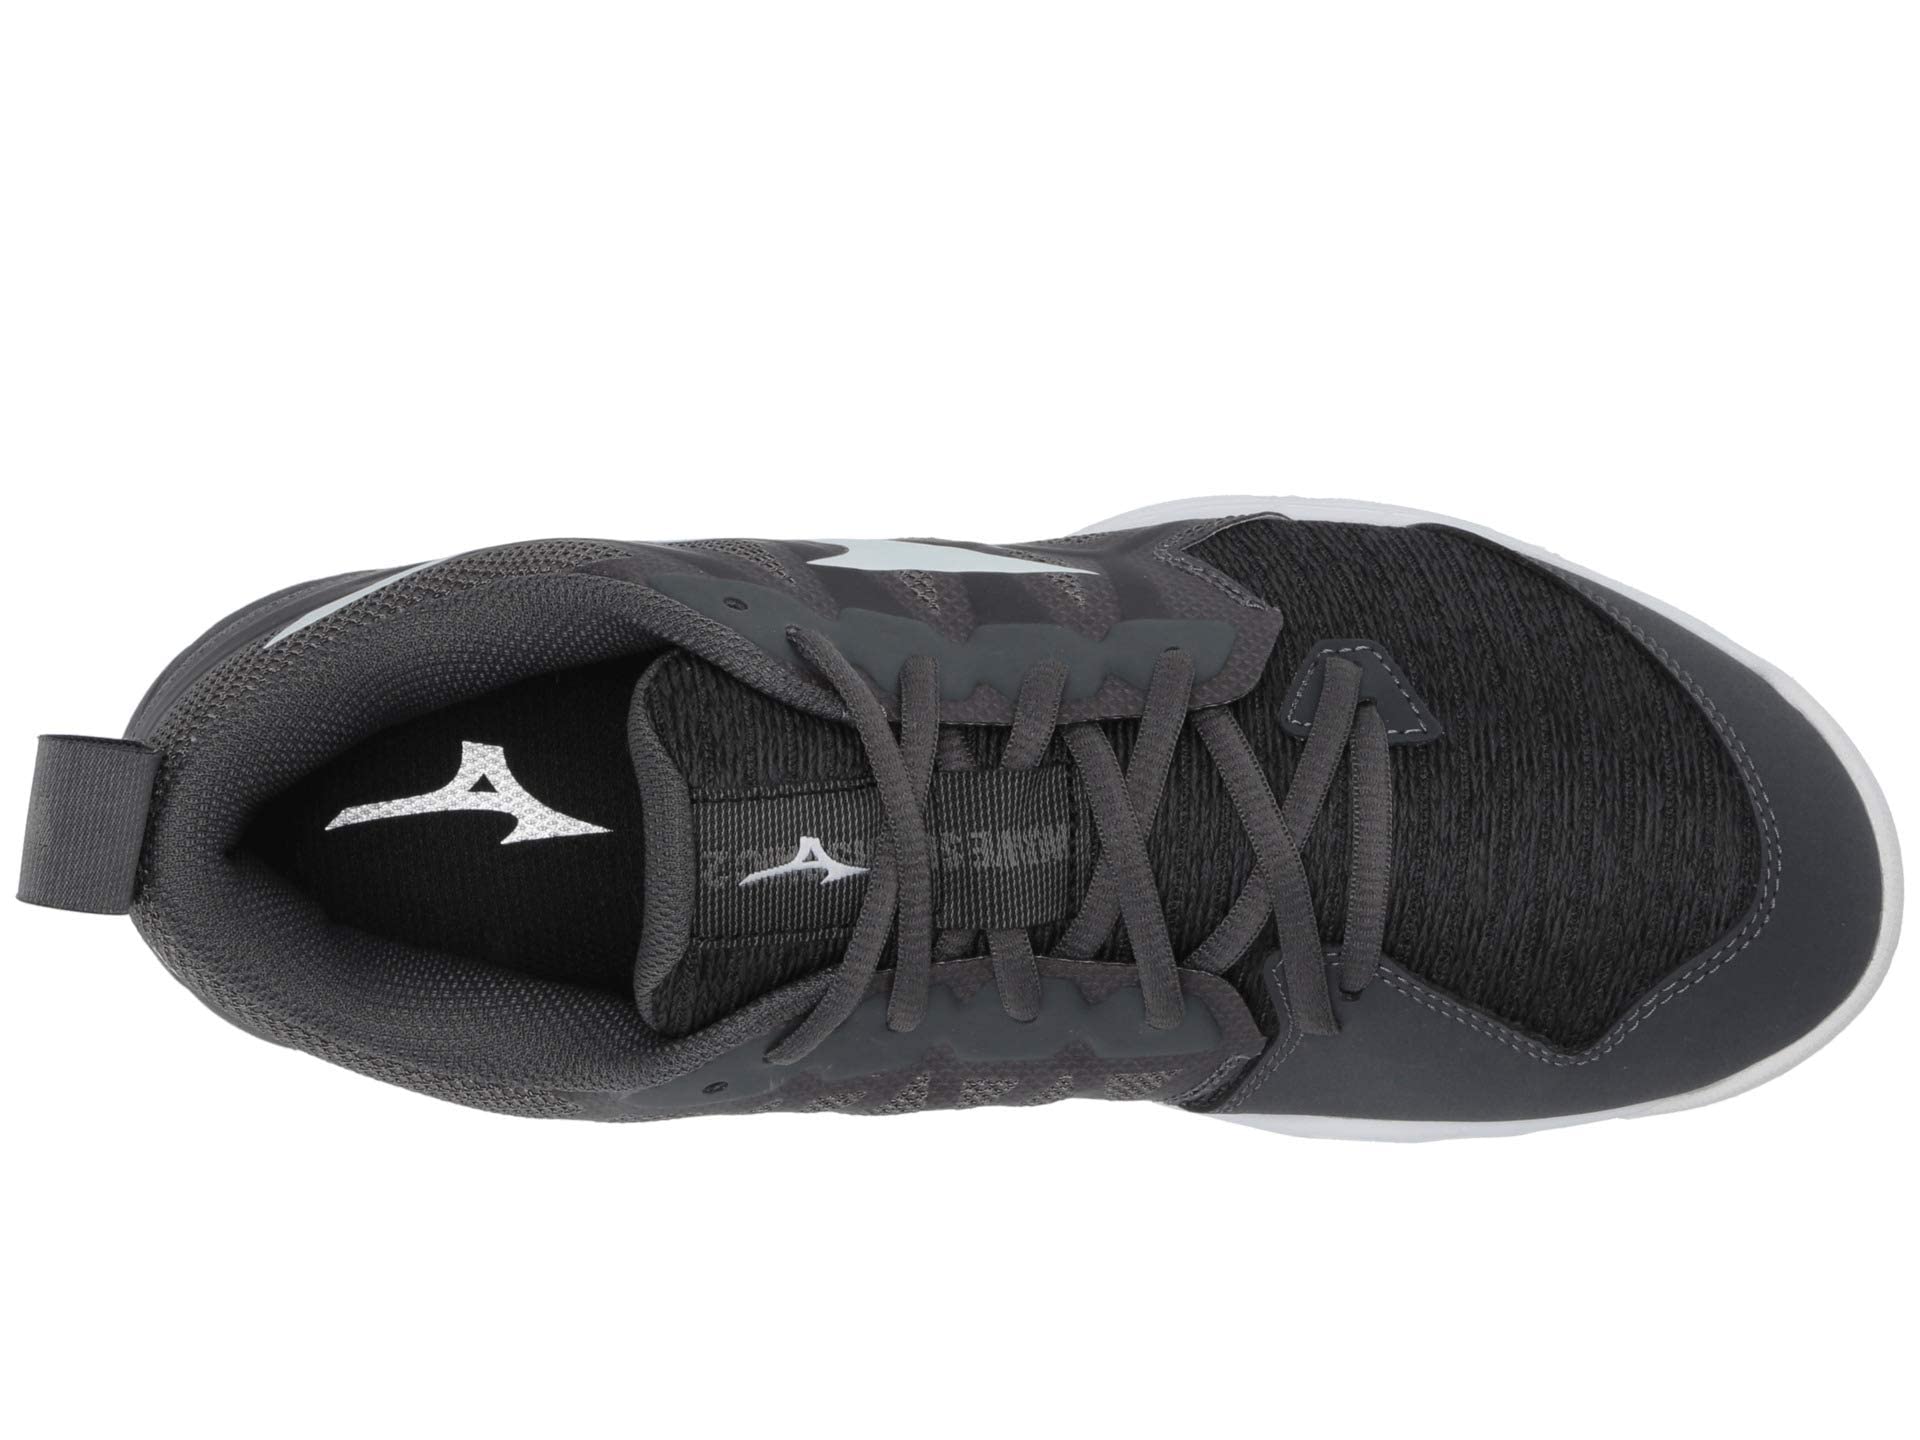 Mizuno Wave Supersonic 2 Womens Volleyball Shoe, Black-Charcoal, 9